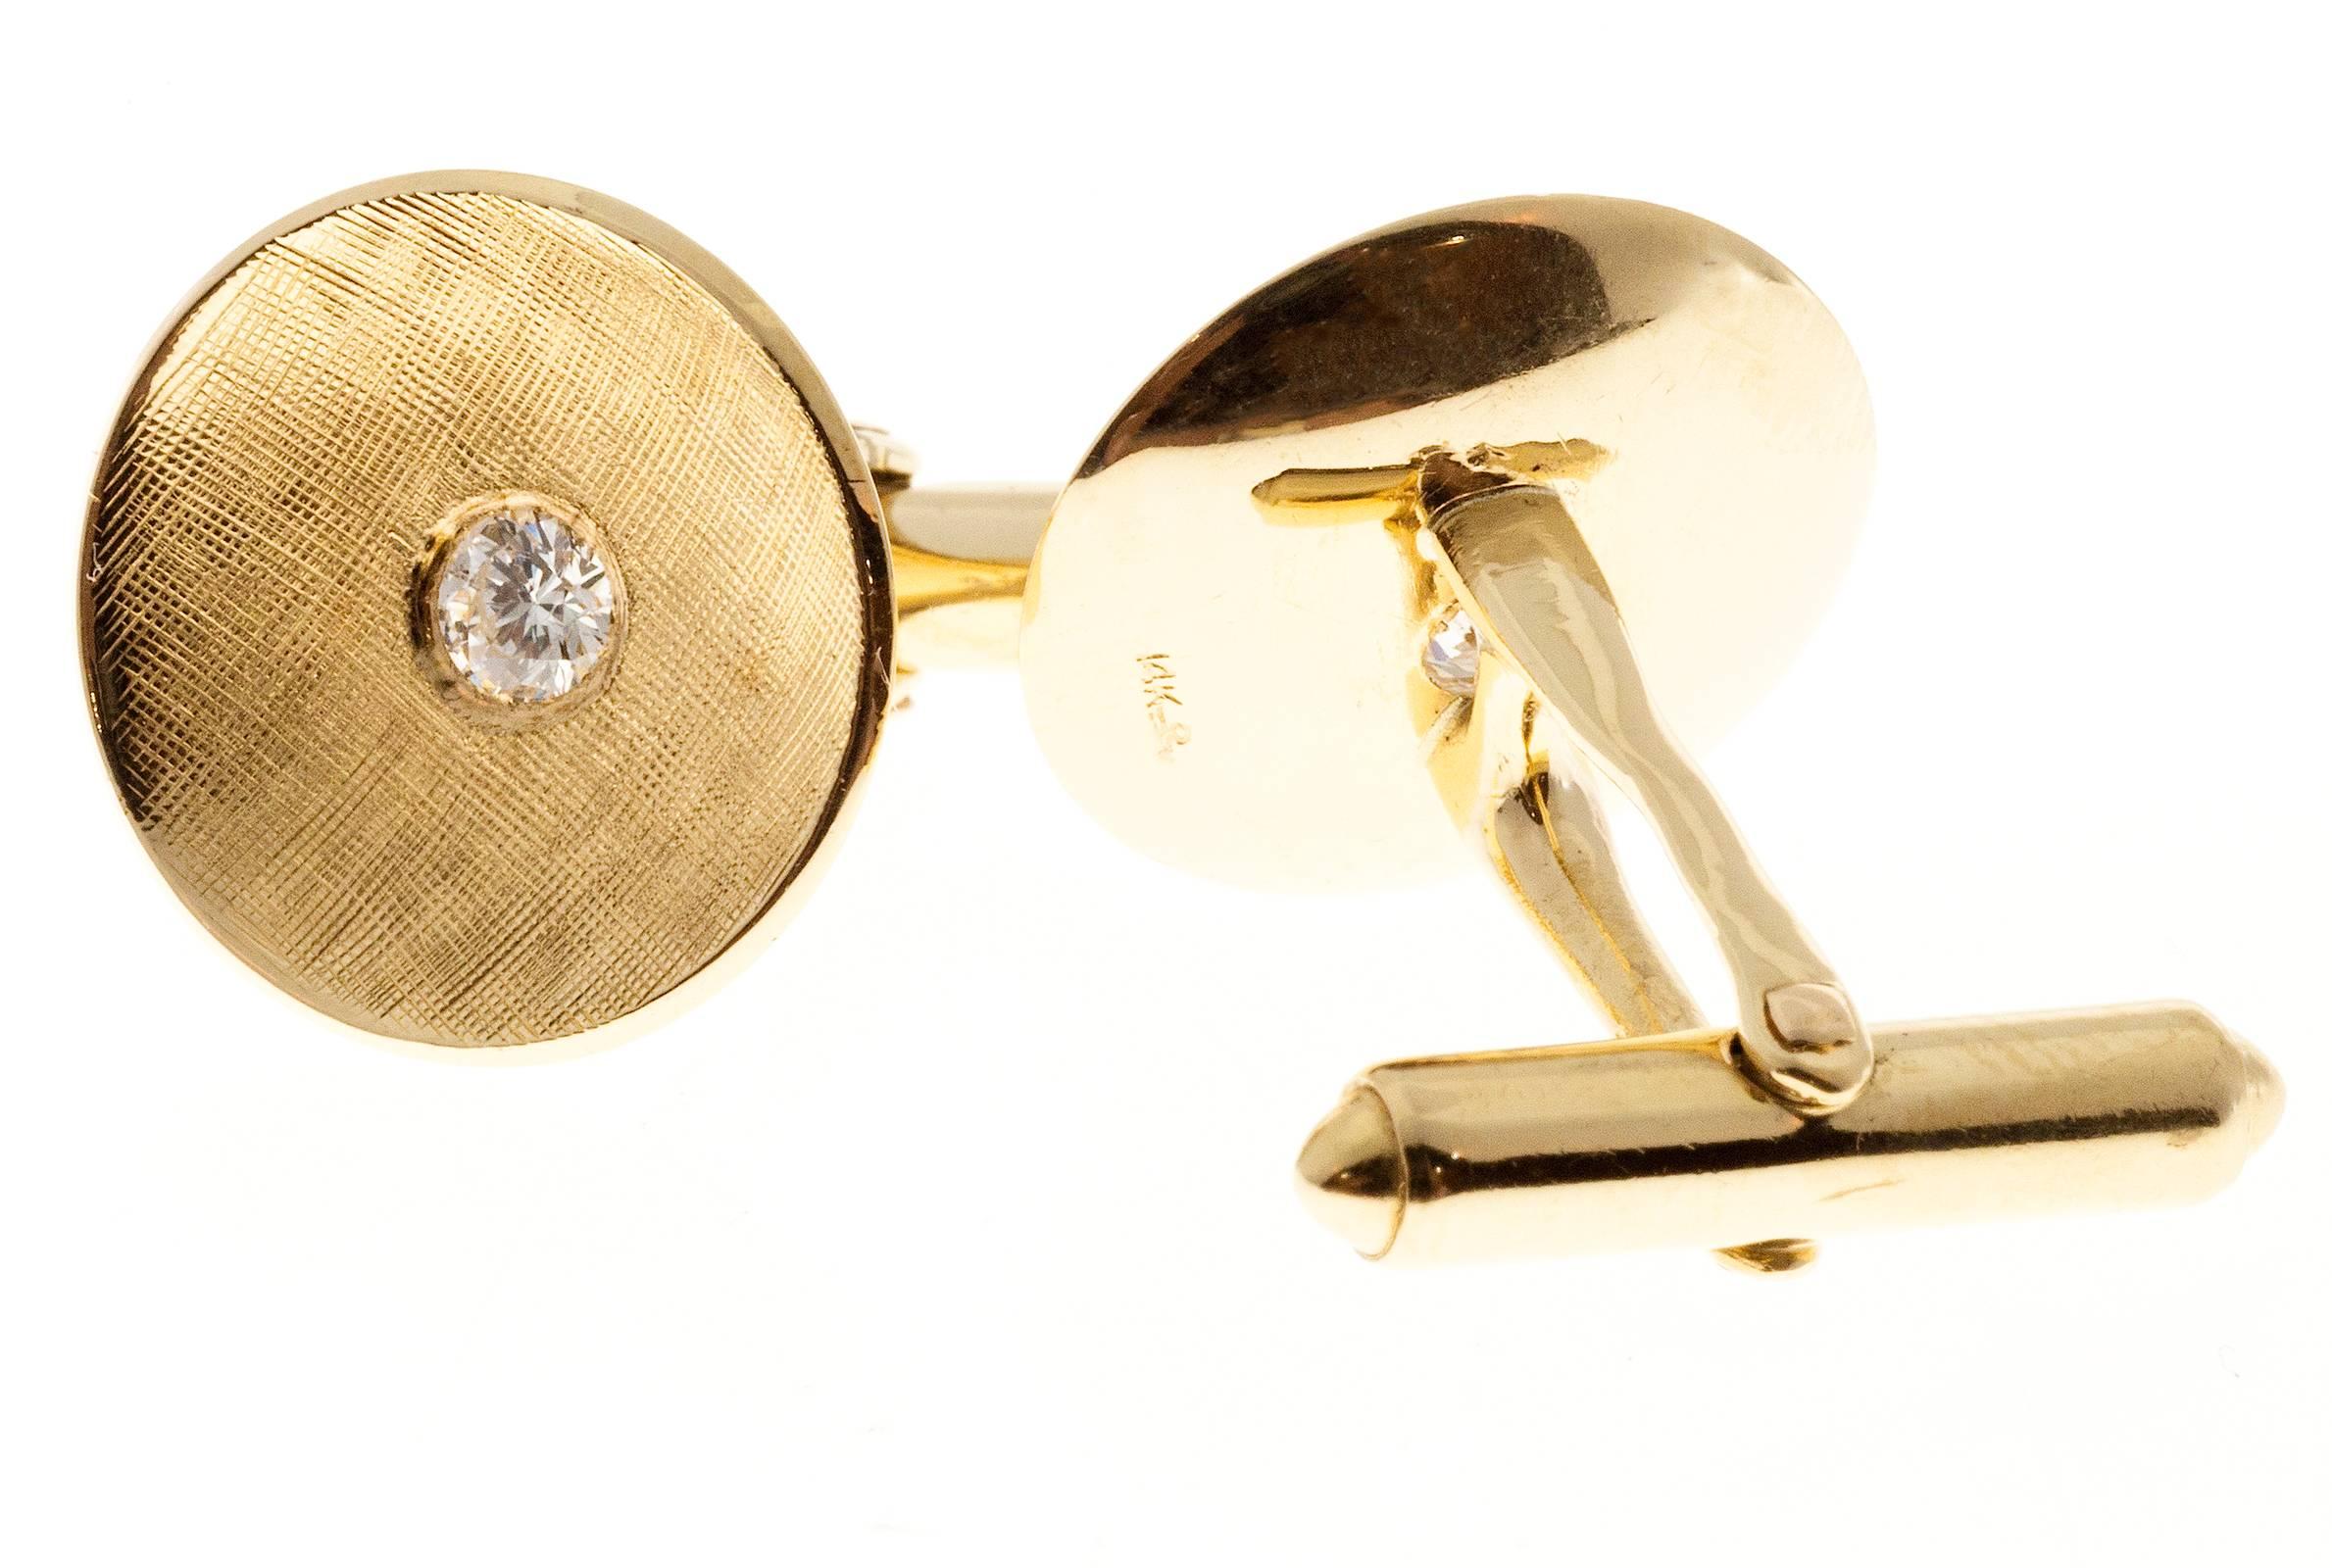 Larter & Sons Diamond Round Concave Gold Cufflinks. Circa 1940’s 

2 round diamonds approx. total weight .40cts, G, VS2
14k Yellow Gold
Stamped Larter & Sons 14k
10.0 grams
Diameter:  11/16 inch
